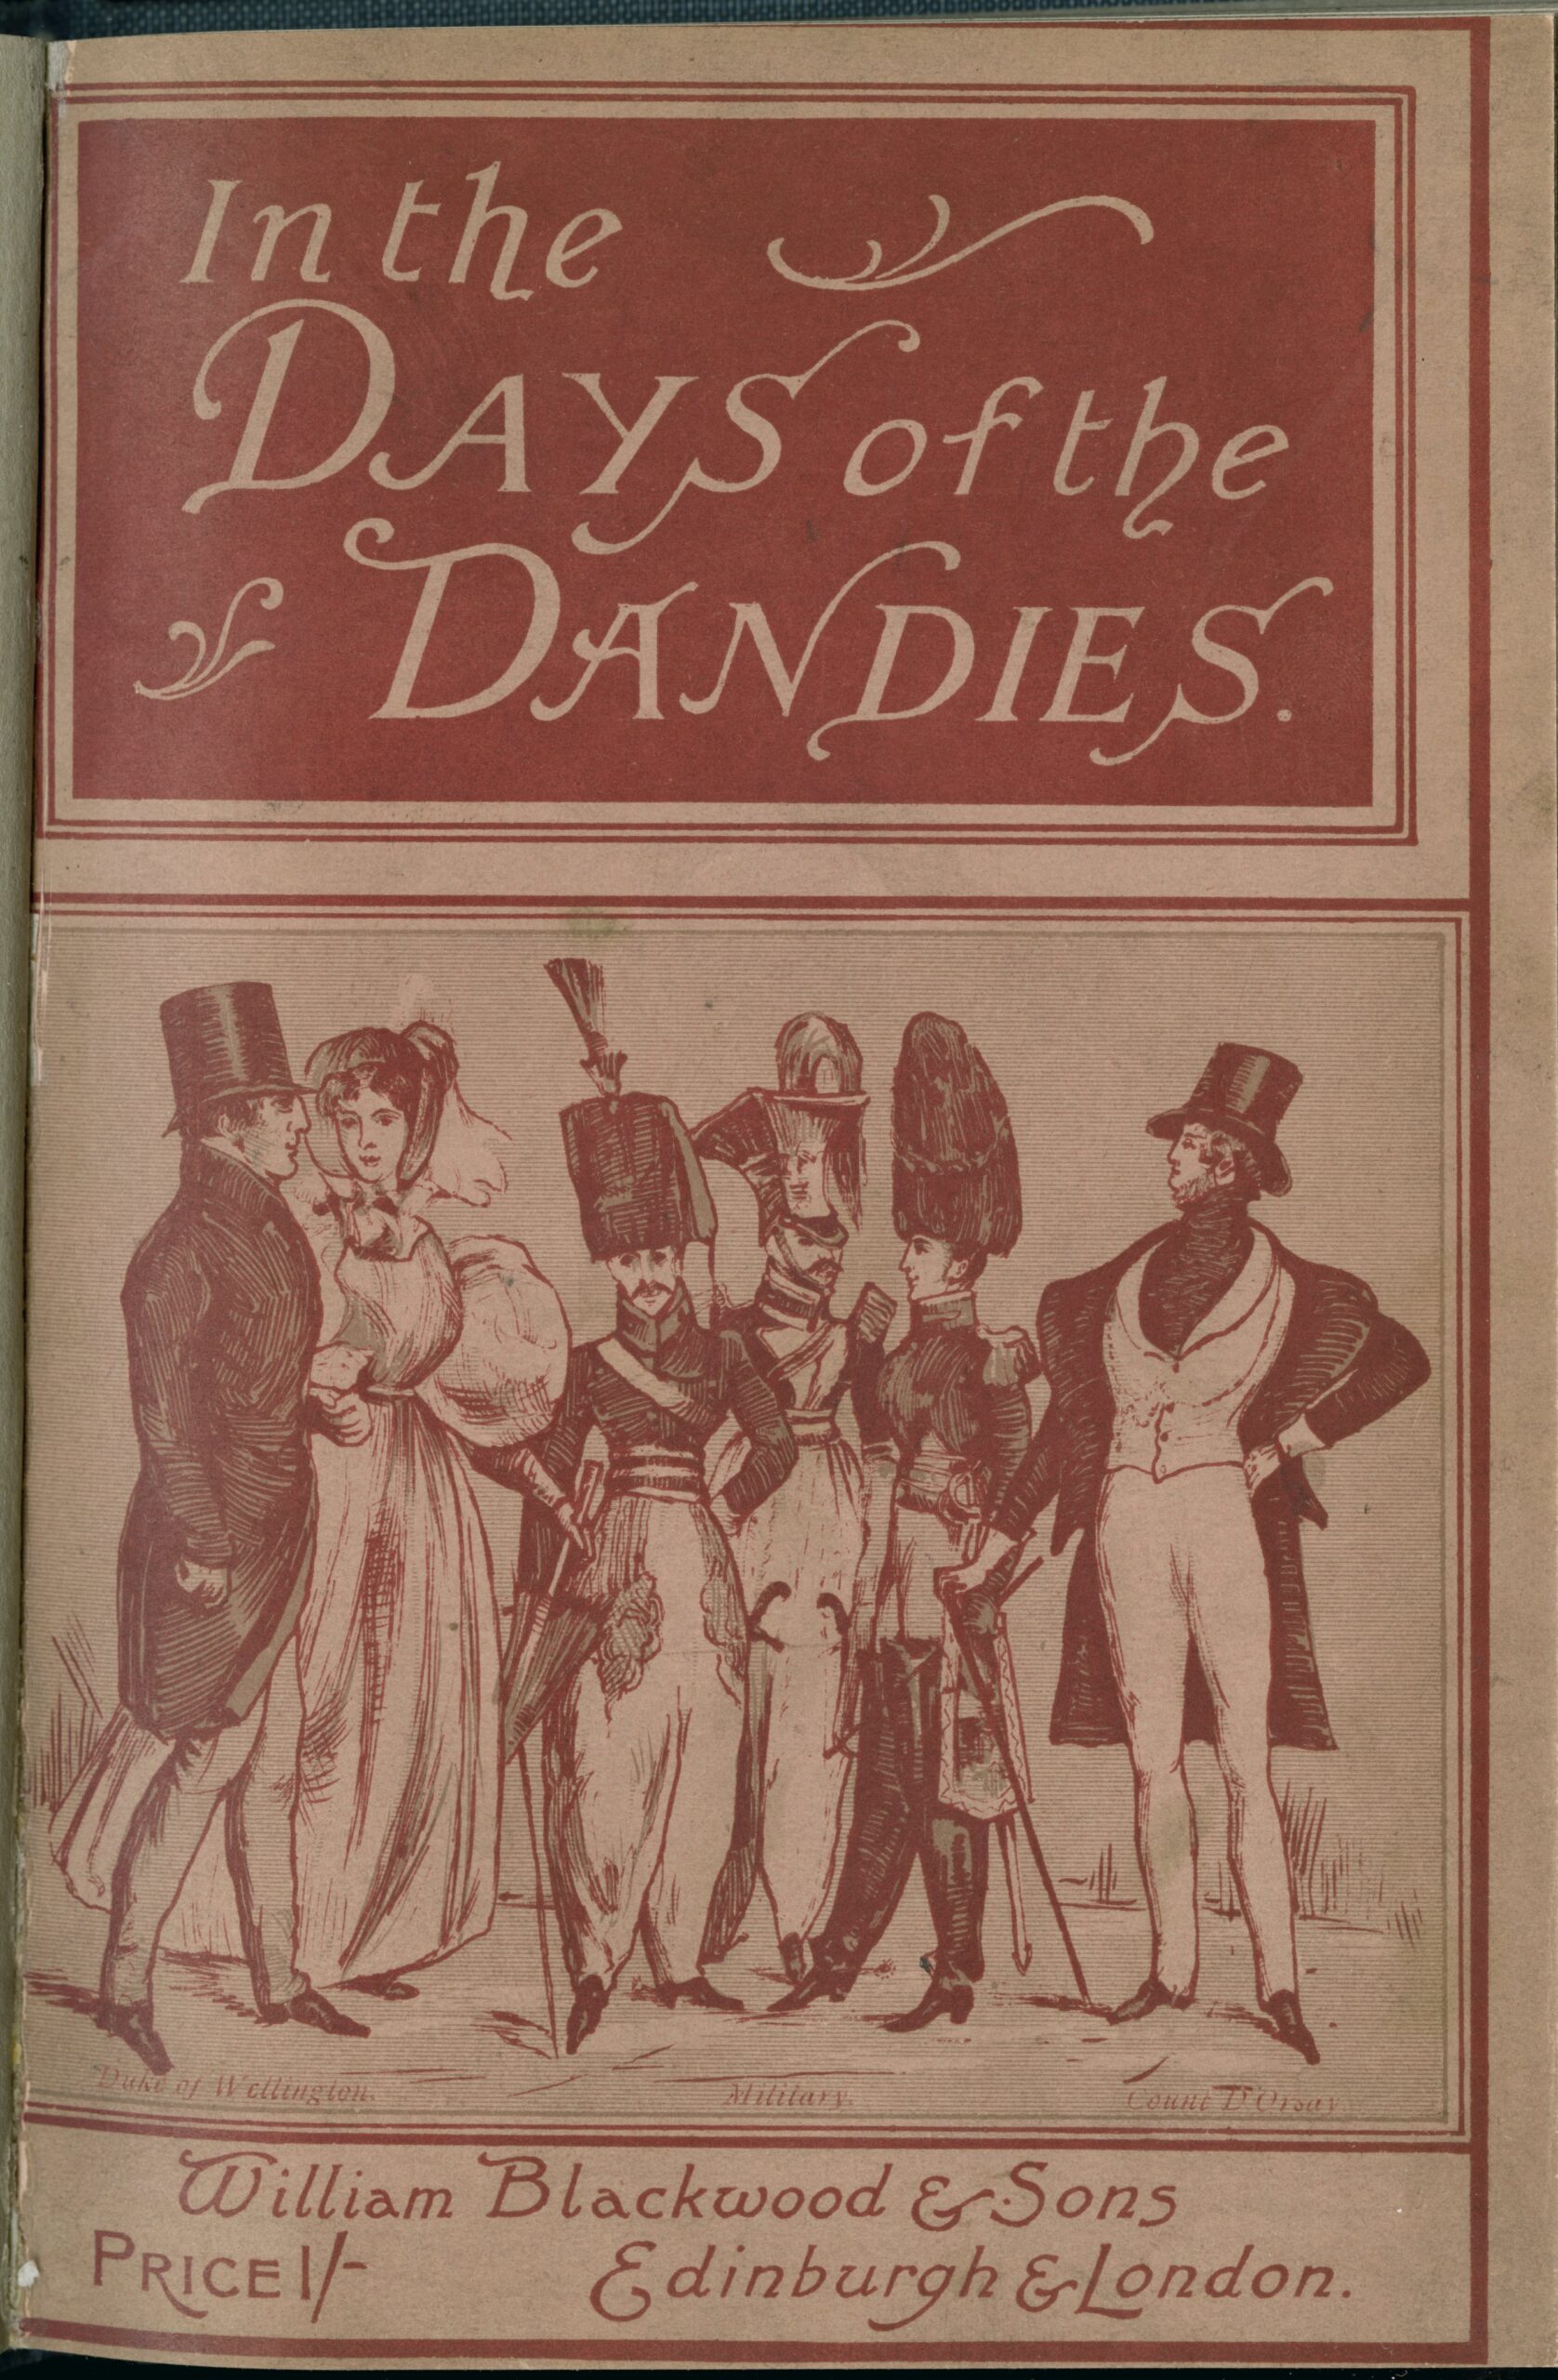 Illustrated cover depicting three soldiers, two gentleman and a woman holding the arm of one of the men.